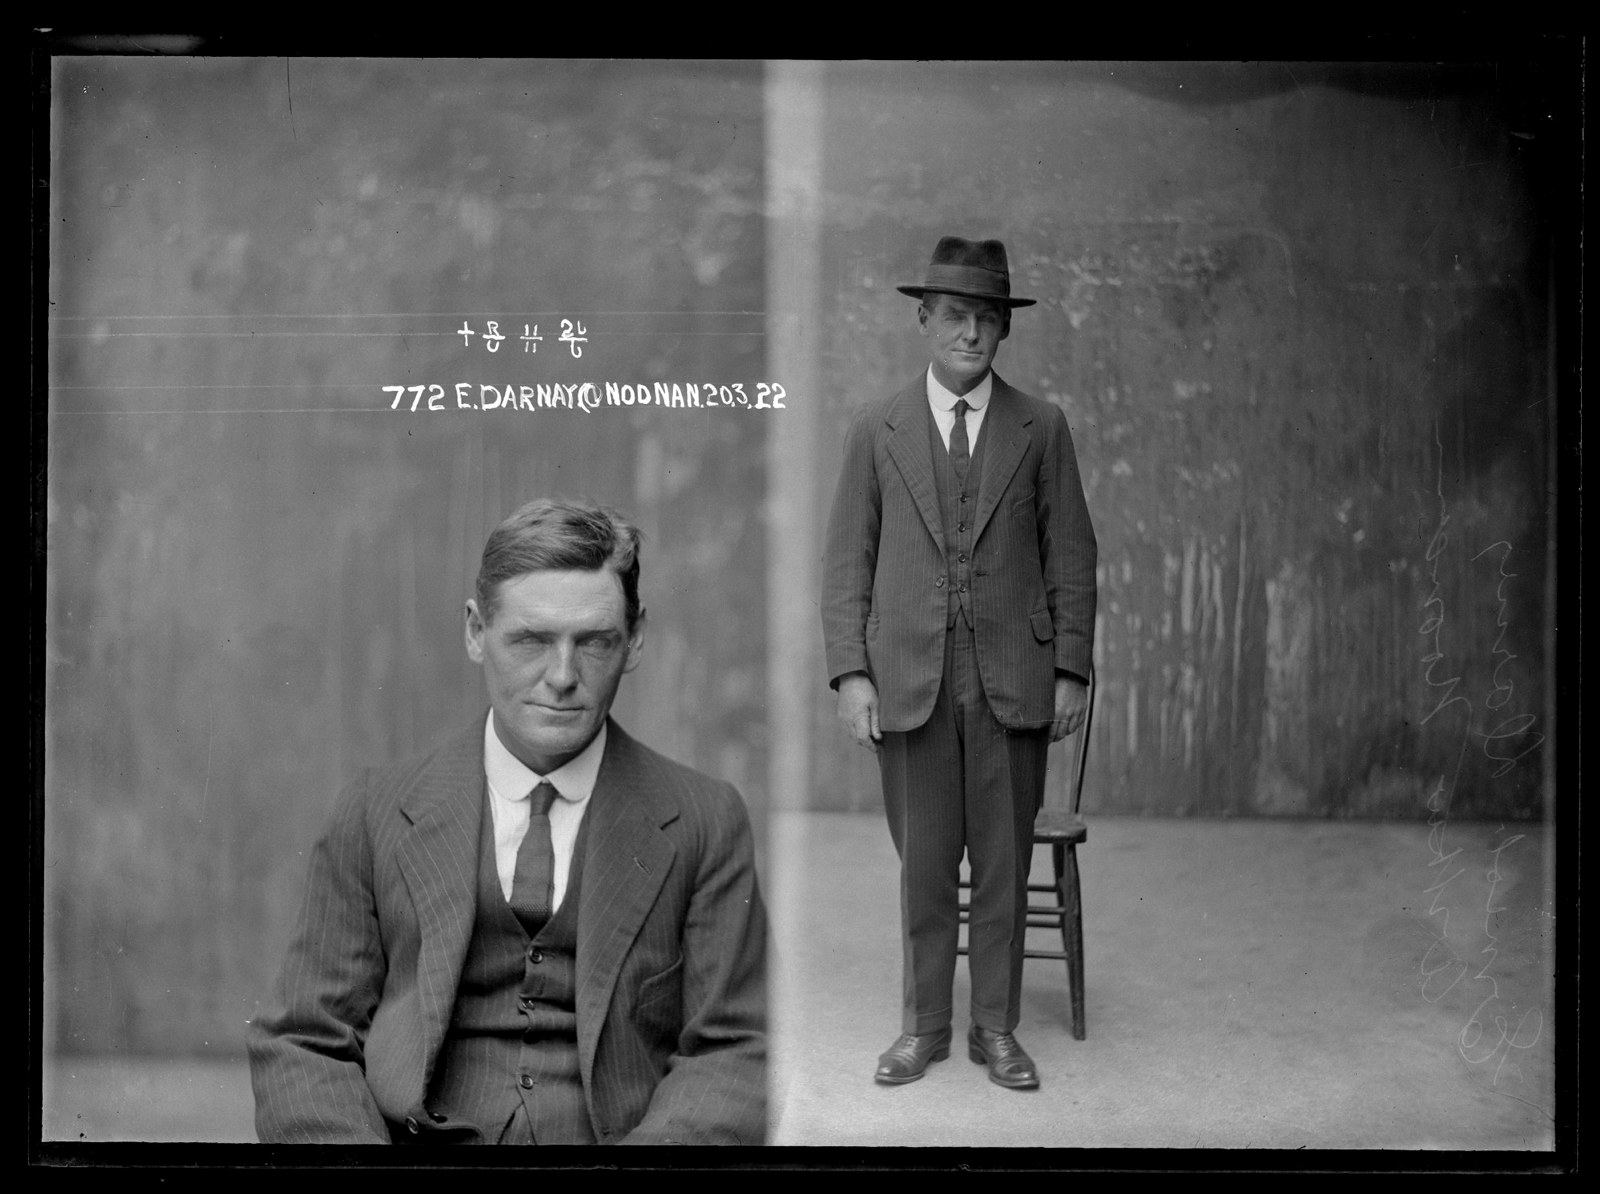 Two photos side by side; man seated and man standing, with hat on.